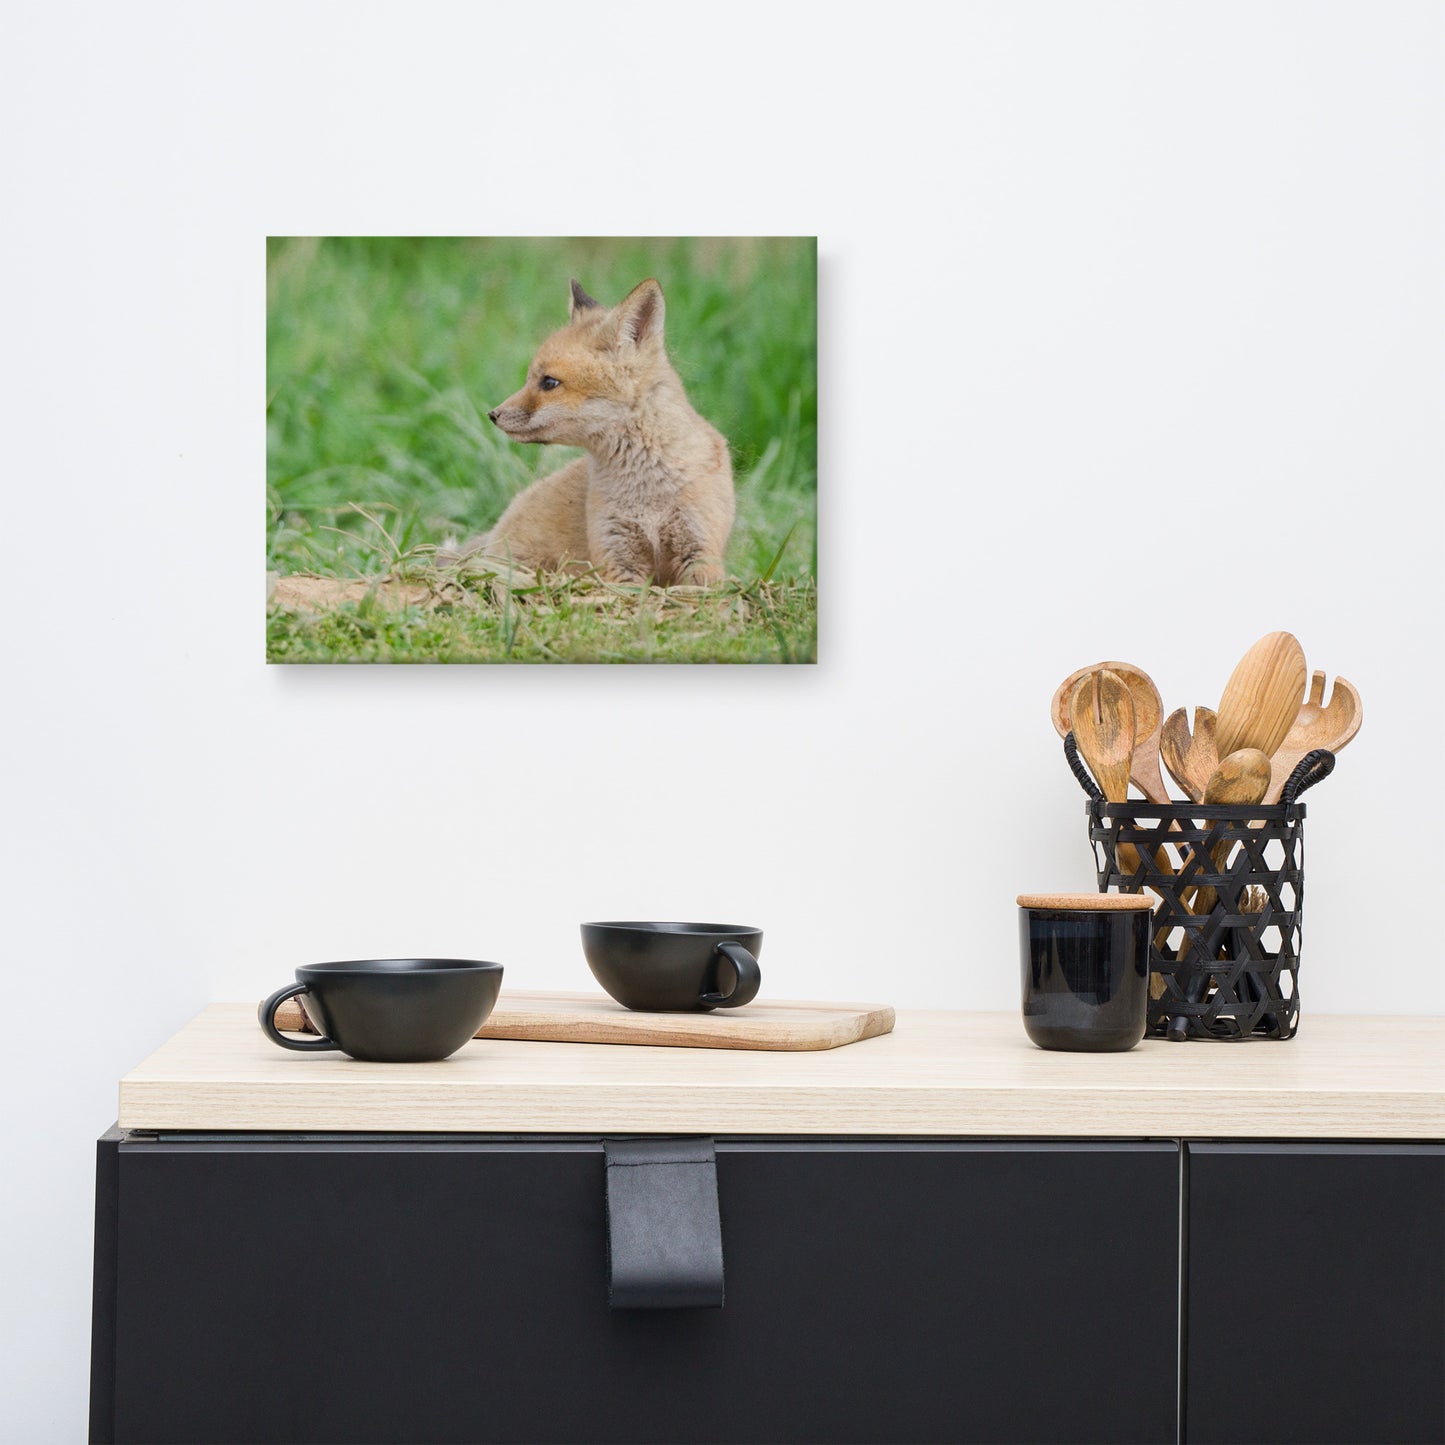 Fox Canvas Pictures: Red Fox Pups - Chillin - Wildlife / Animal / Nature Photograph Canvas Wall Art Print - Artwork